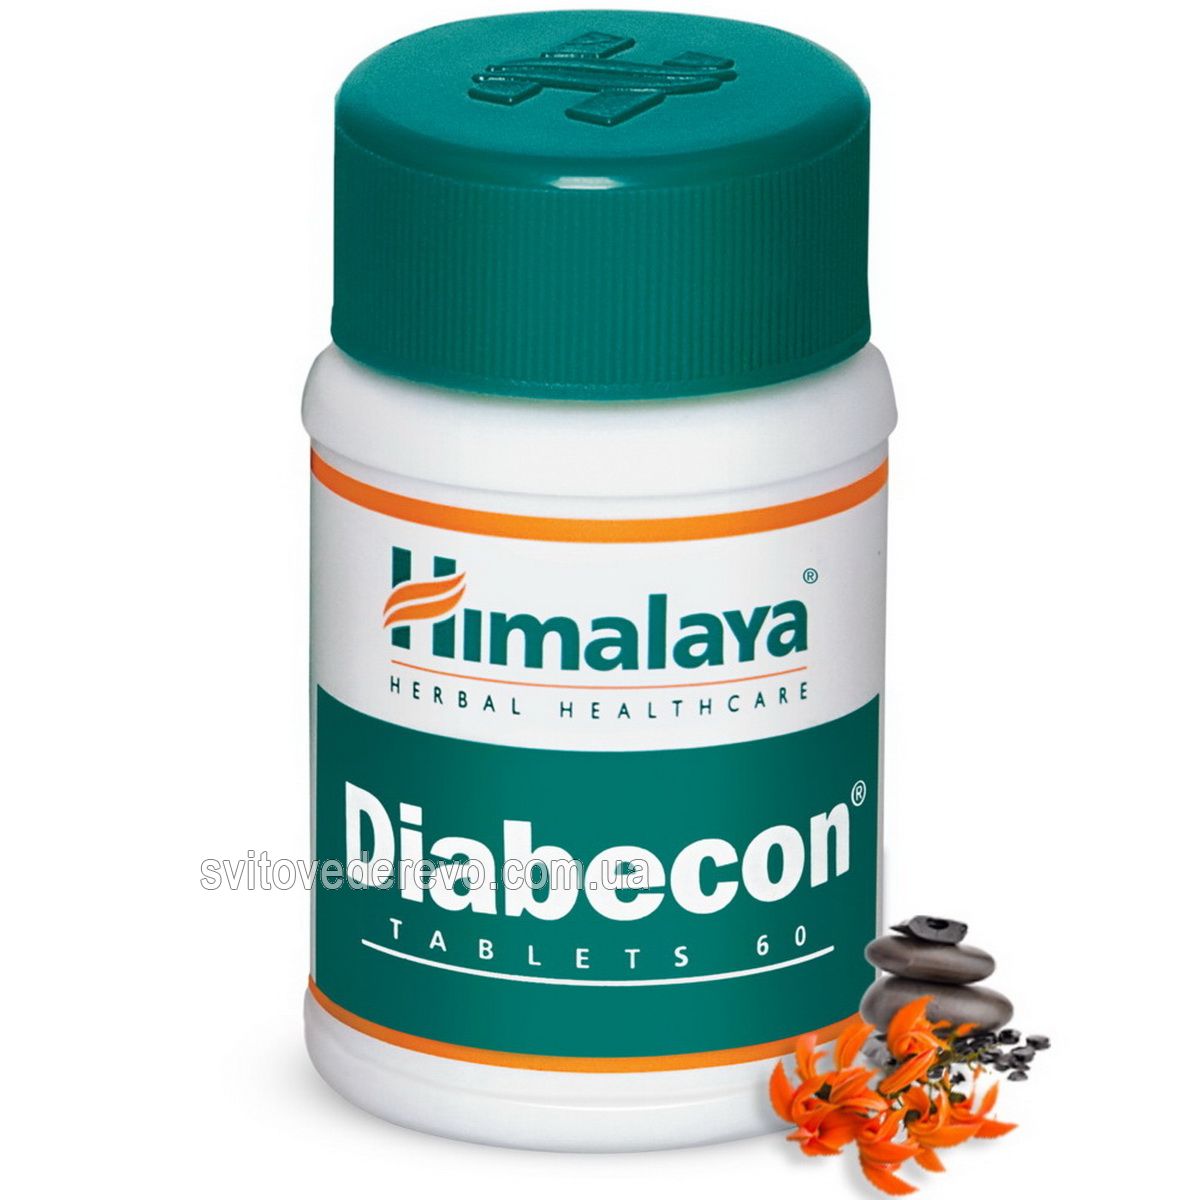 diabecon ds uses